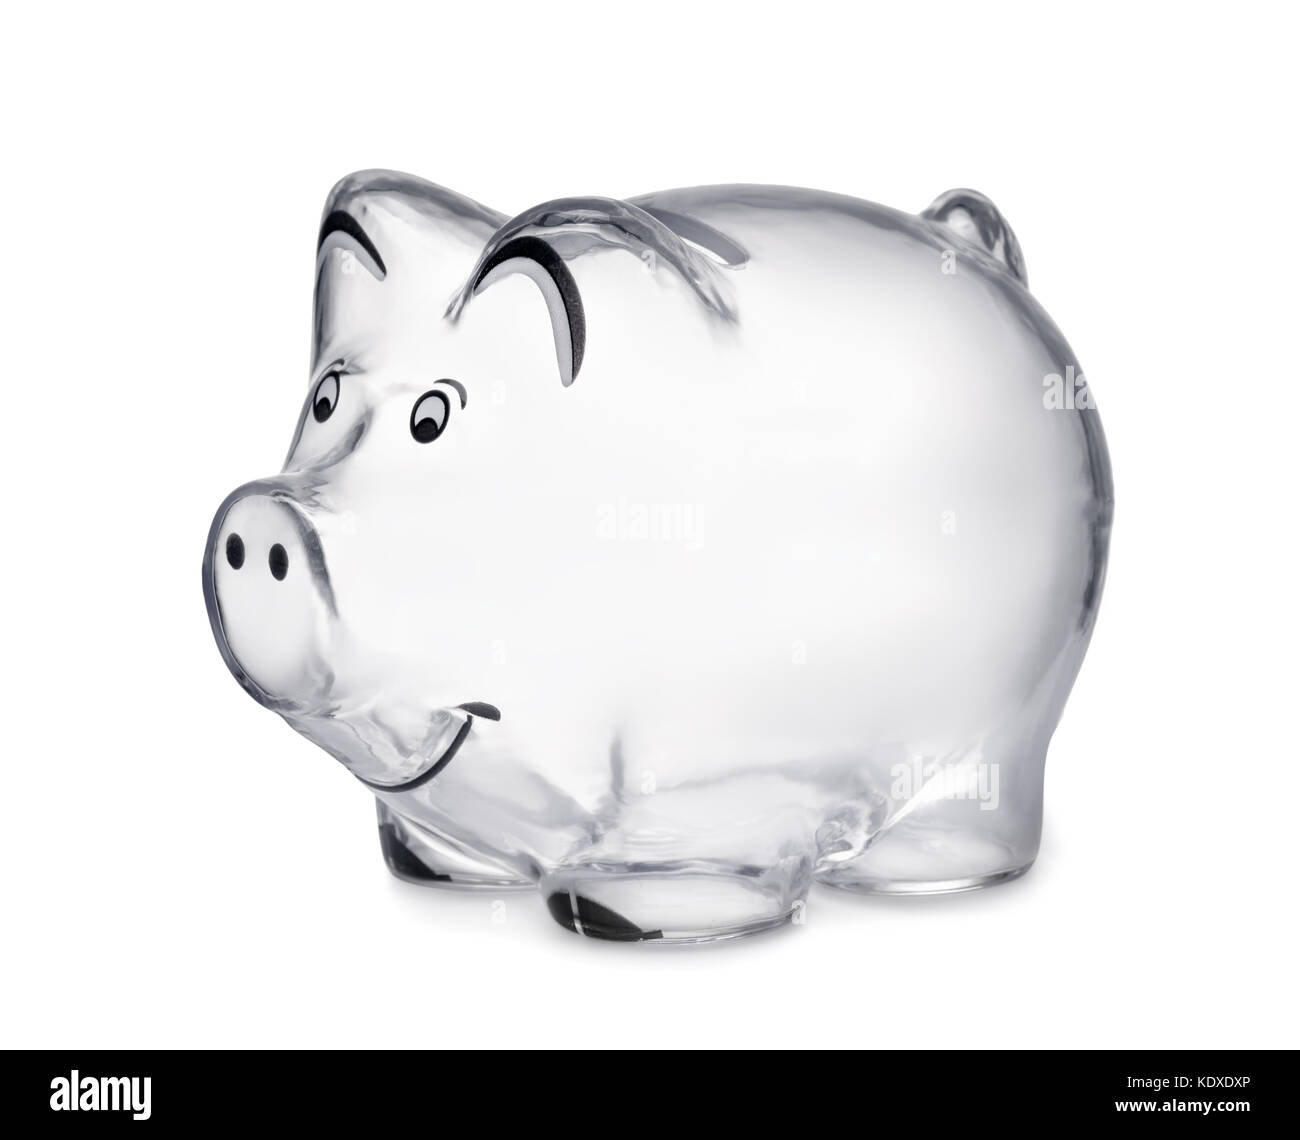 Transparent piggy bank isolated on white Stock Photo